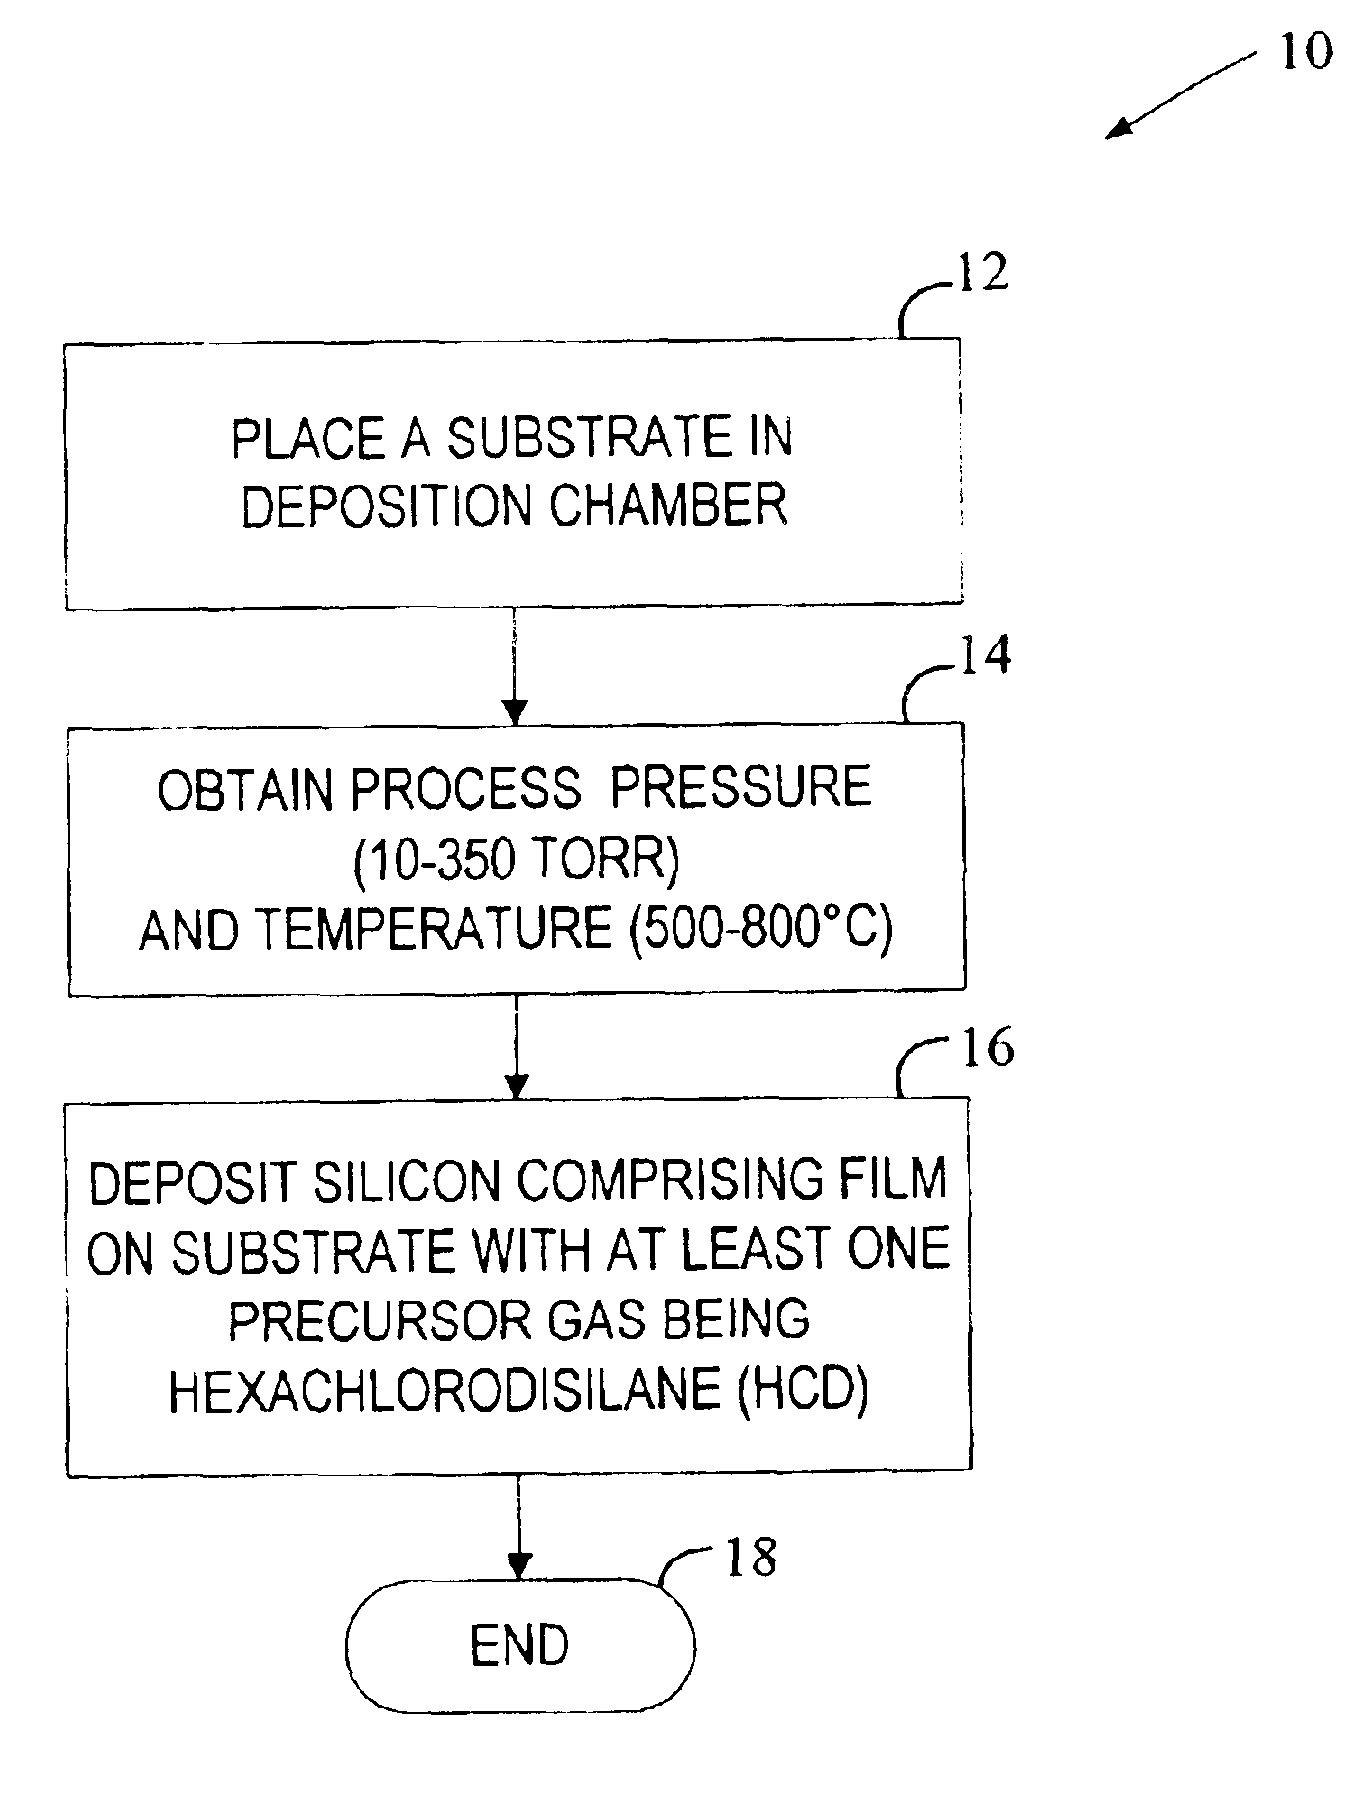 Methods for forming silicon comprising films using hexachlorodisilane in a single-wafer deposion chamber